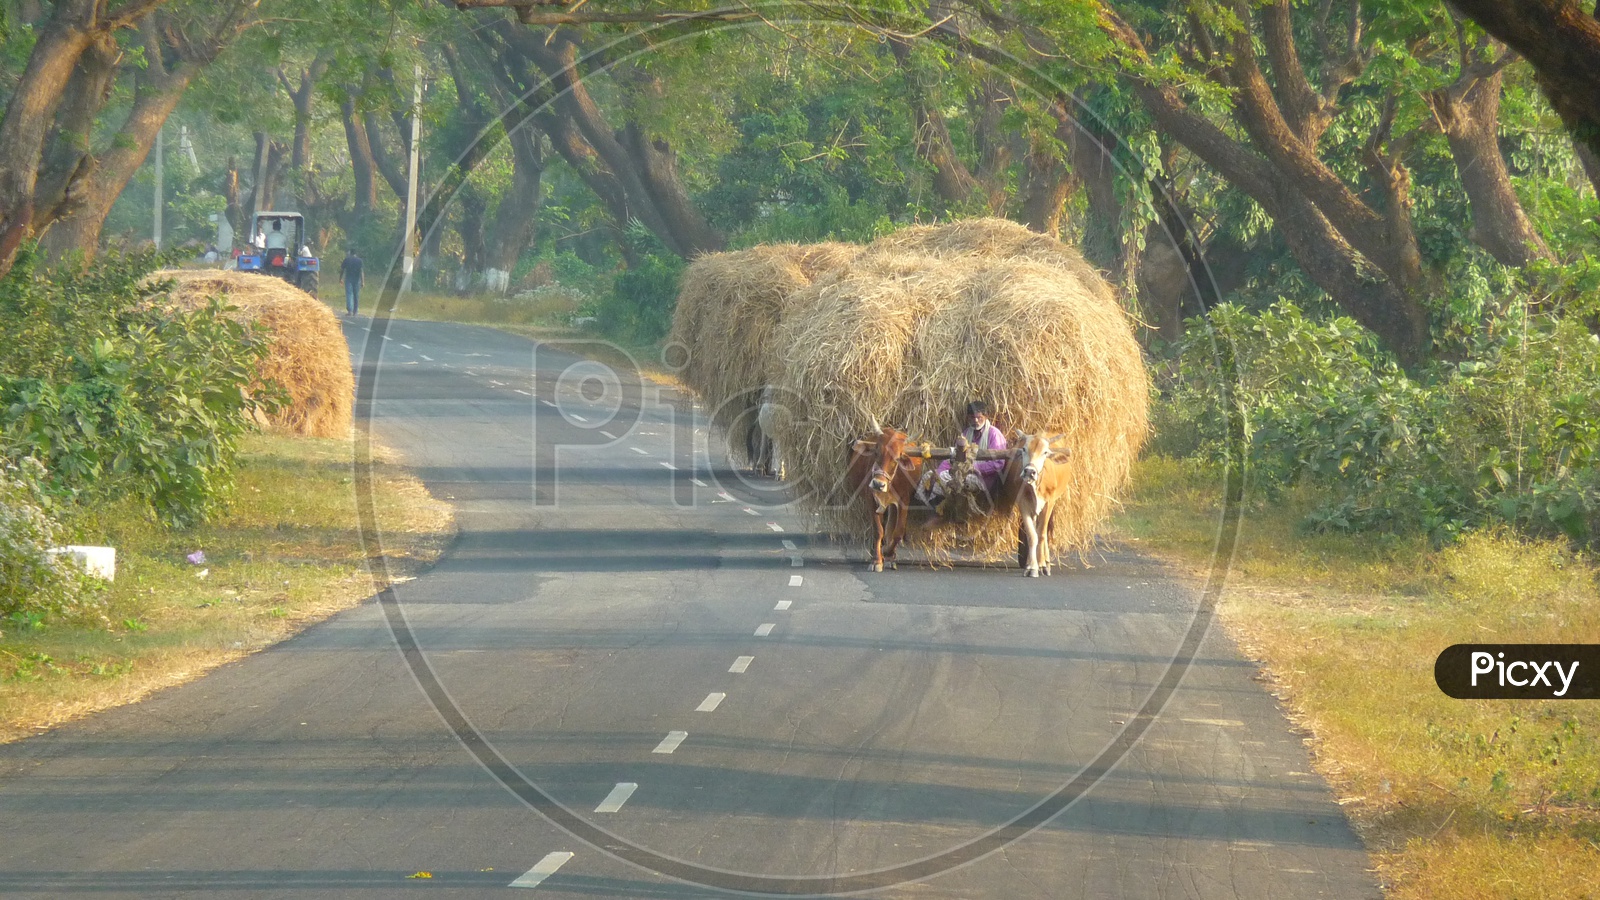 Bullock cart with Grass load